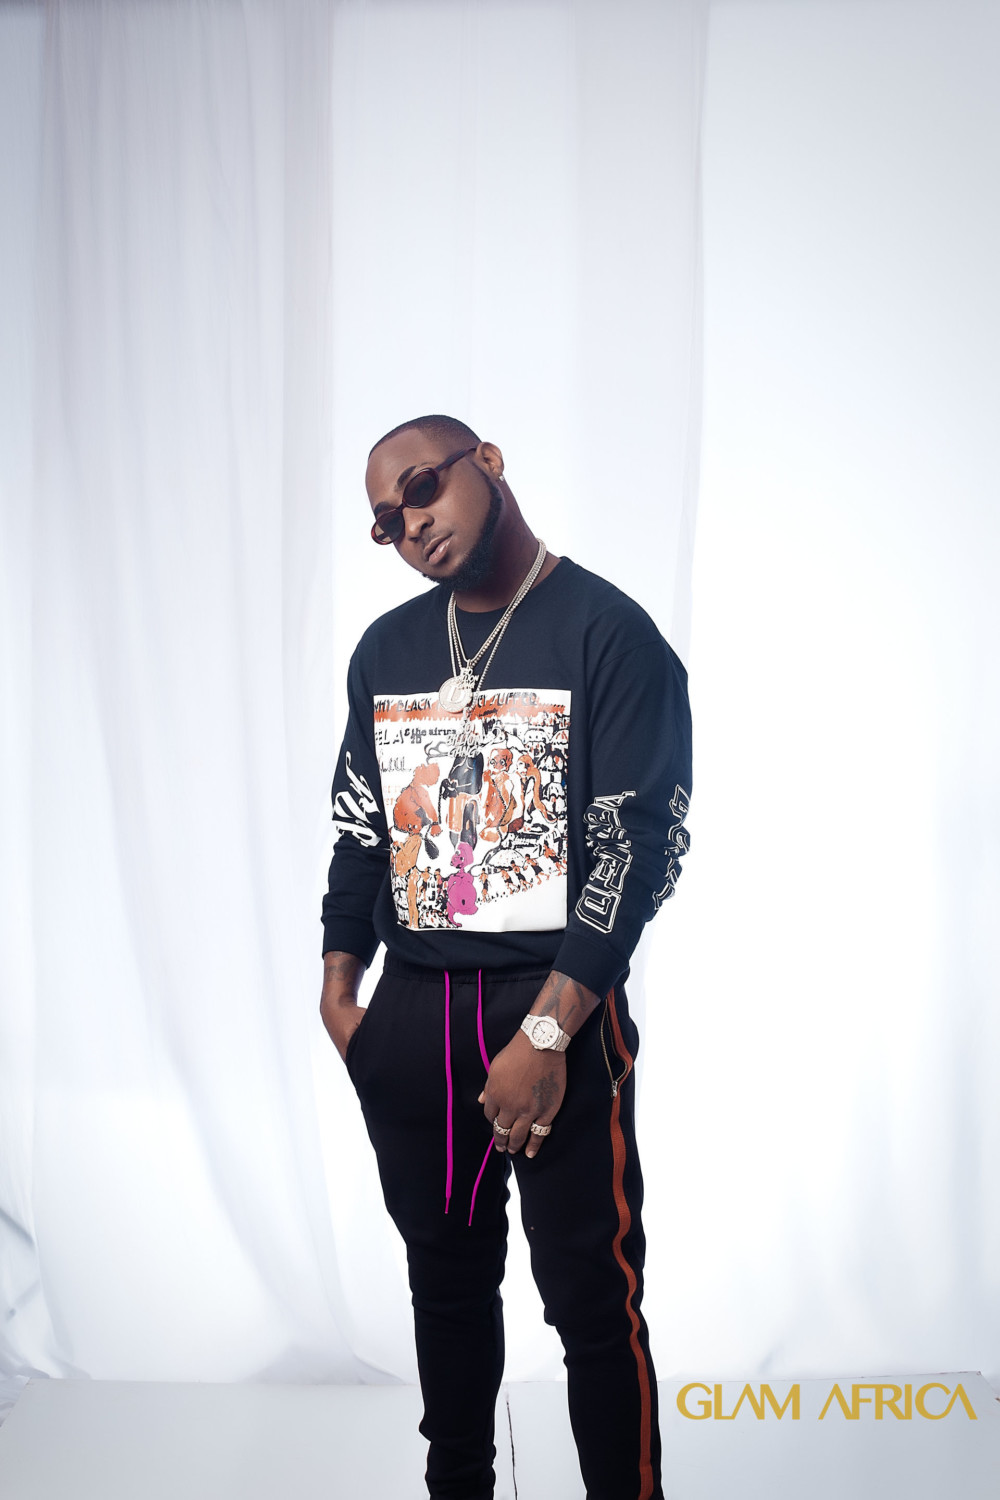 See Davido’s reaction after alleged owner of Instablog9ja is exposed